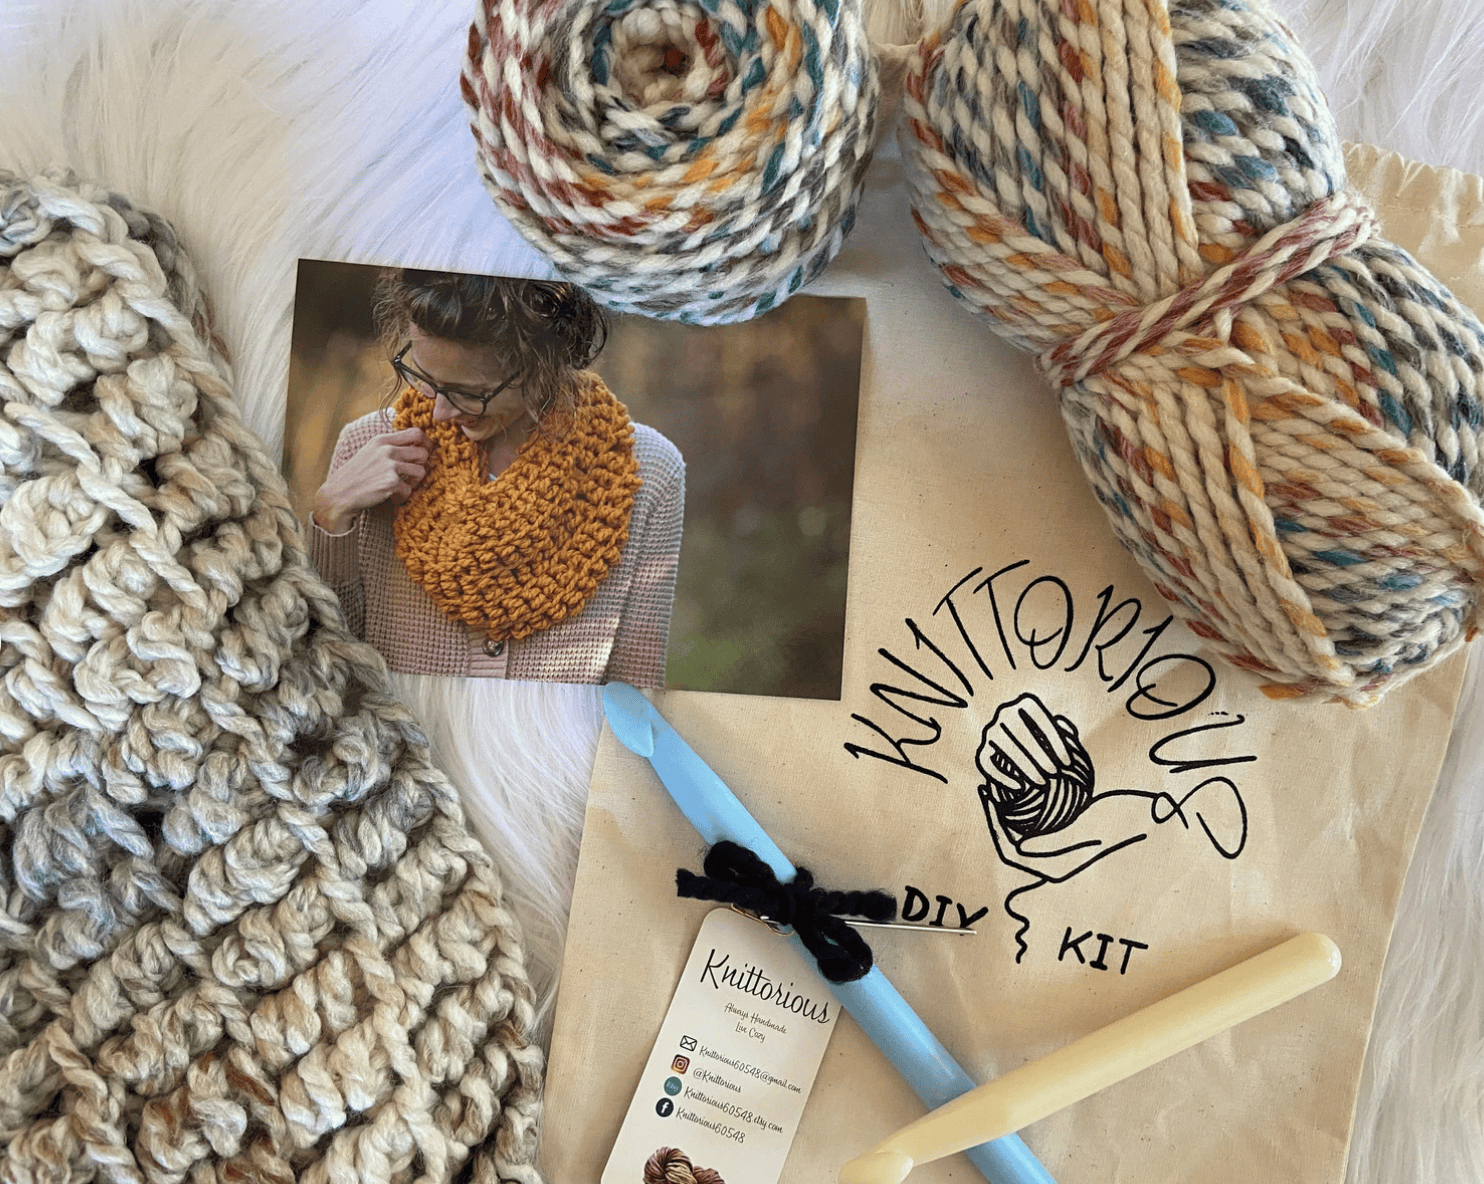 Crochet a Scarf Kit from Knitorious